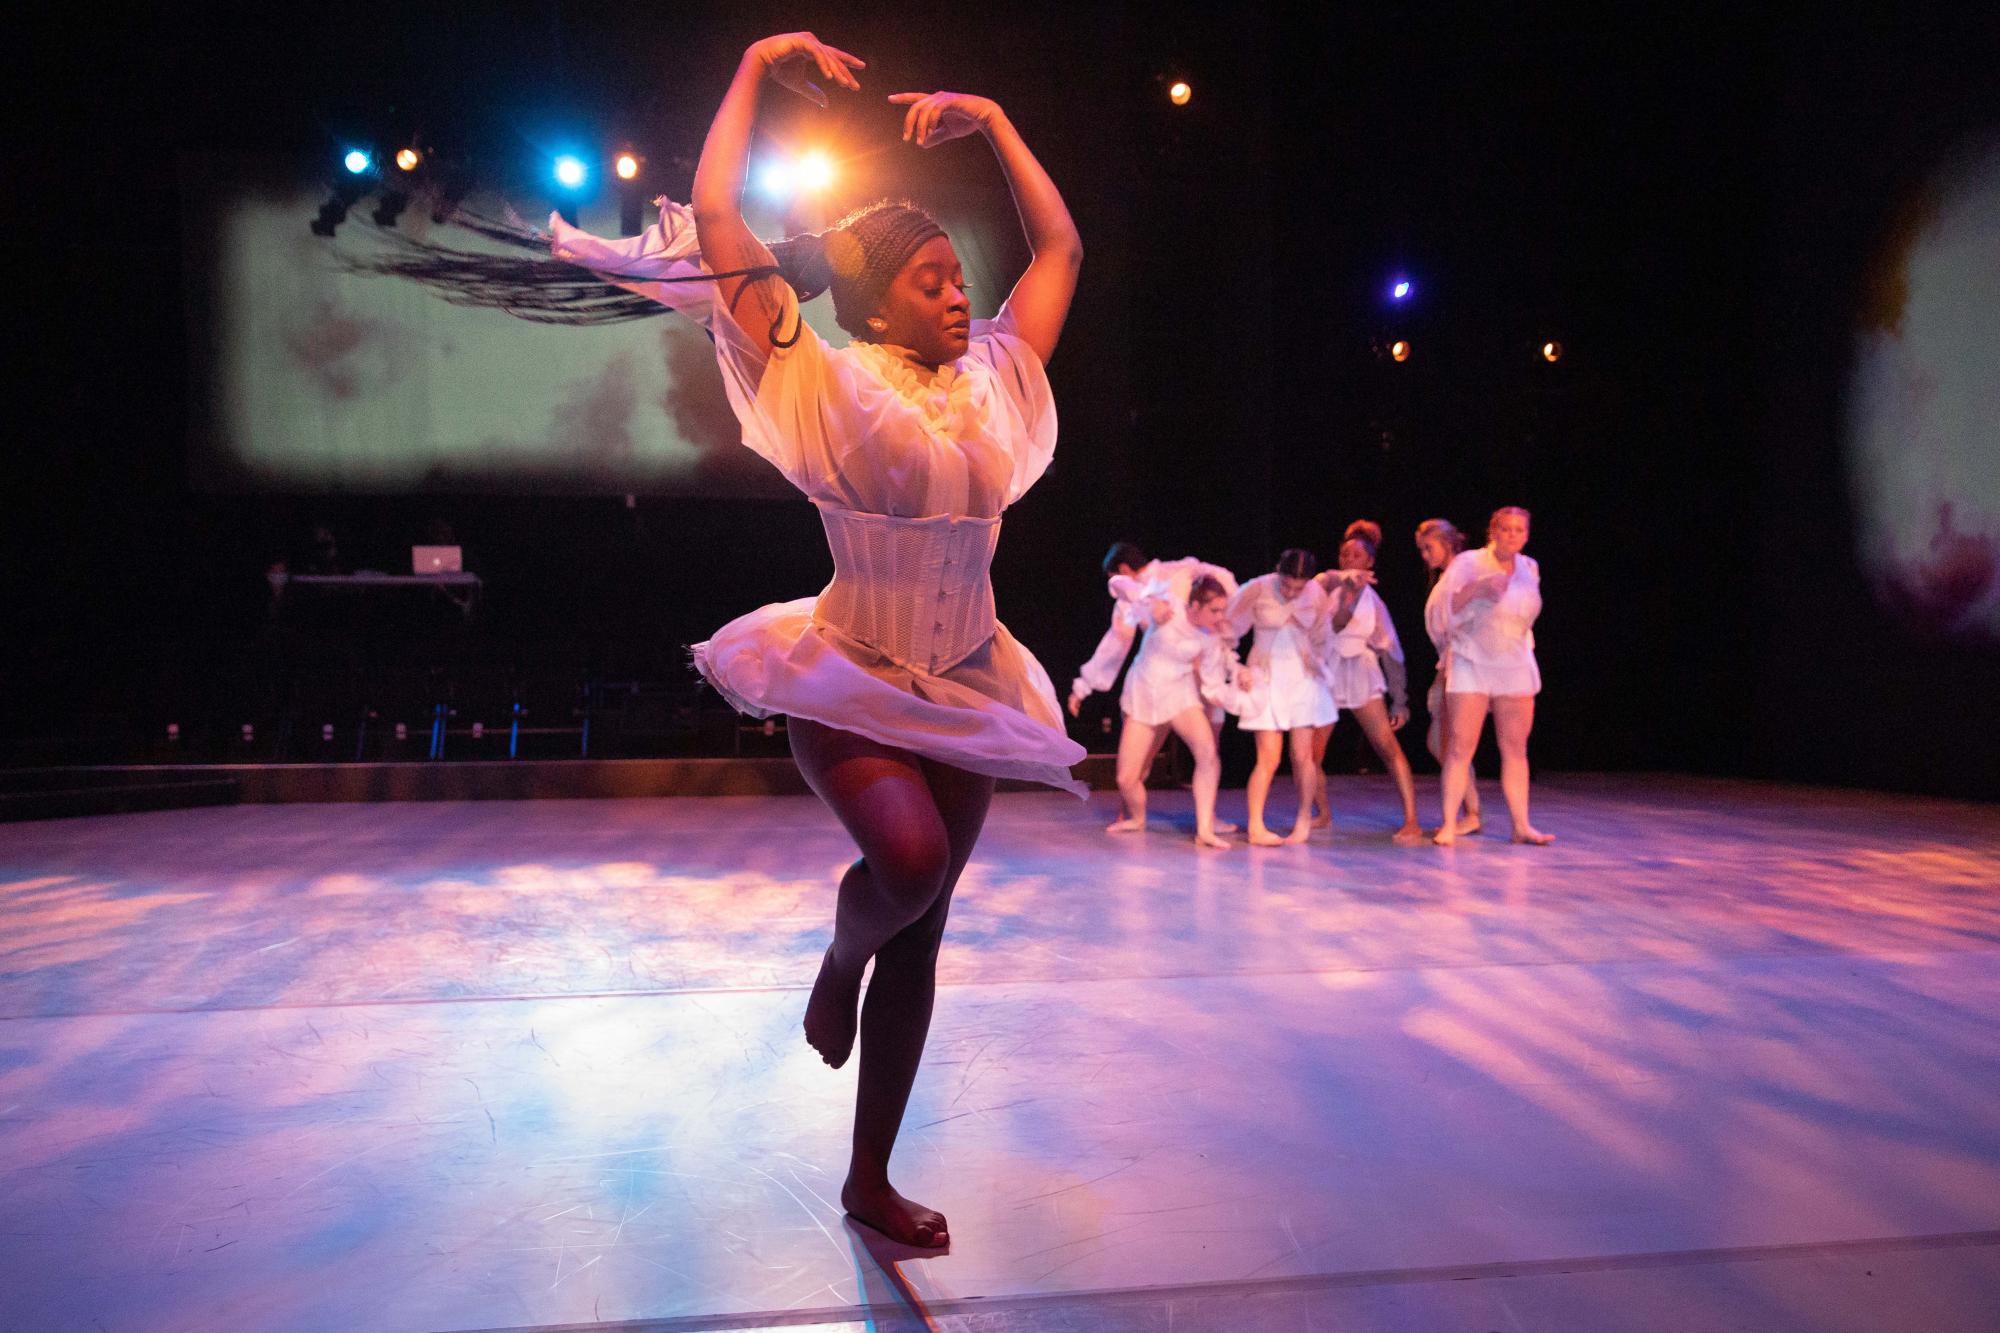 A dancer in all white pirouettes, with a group of dancers behind her